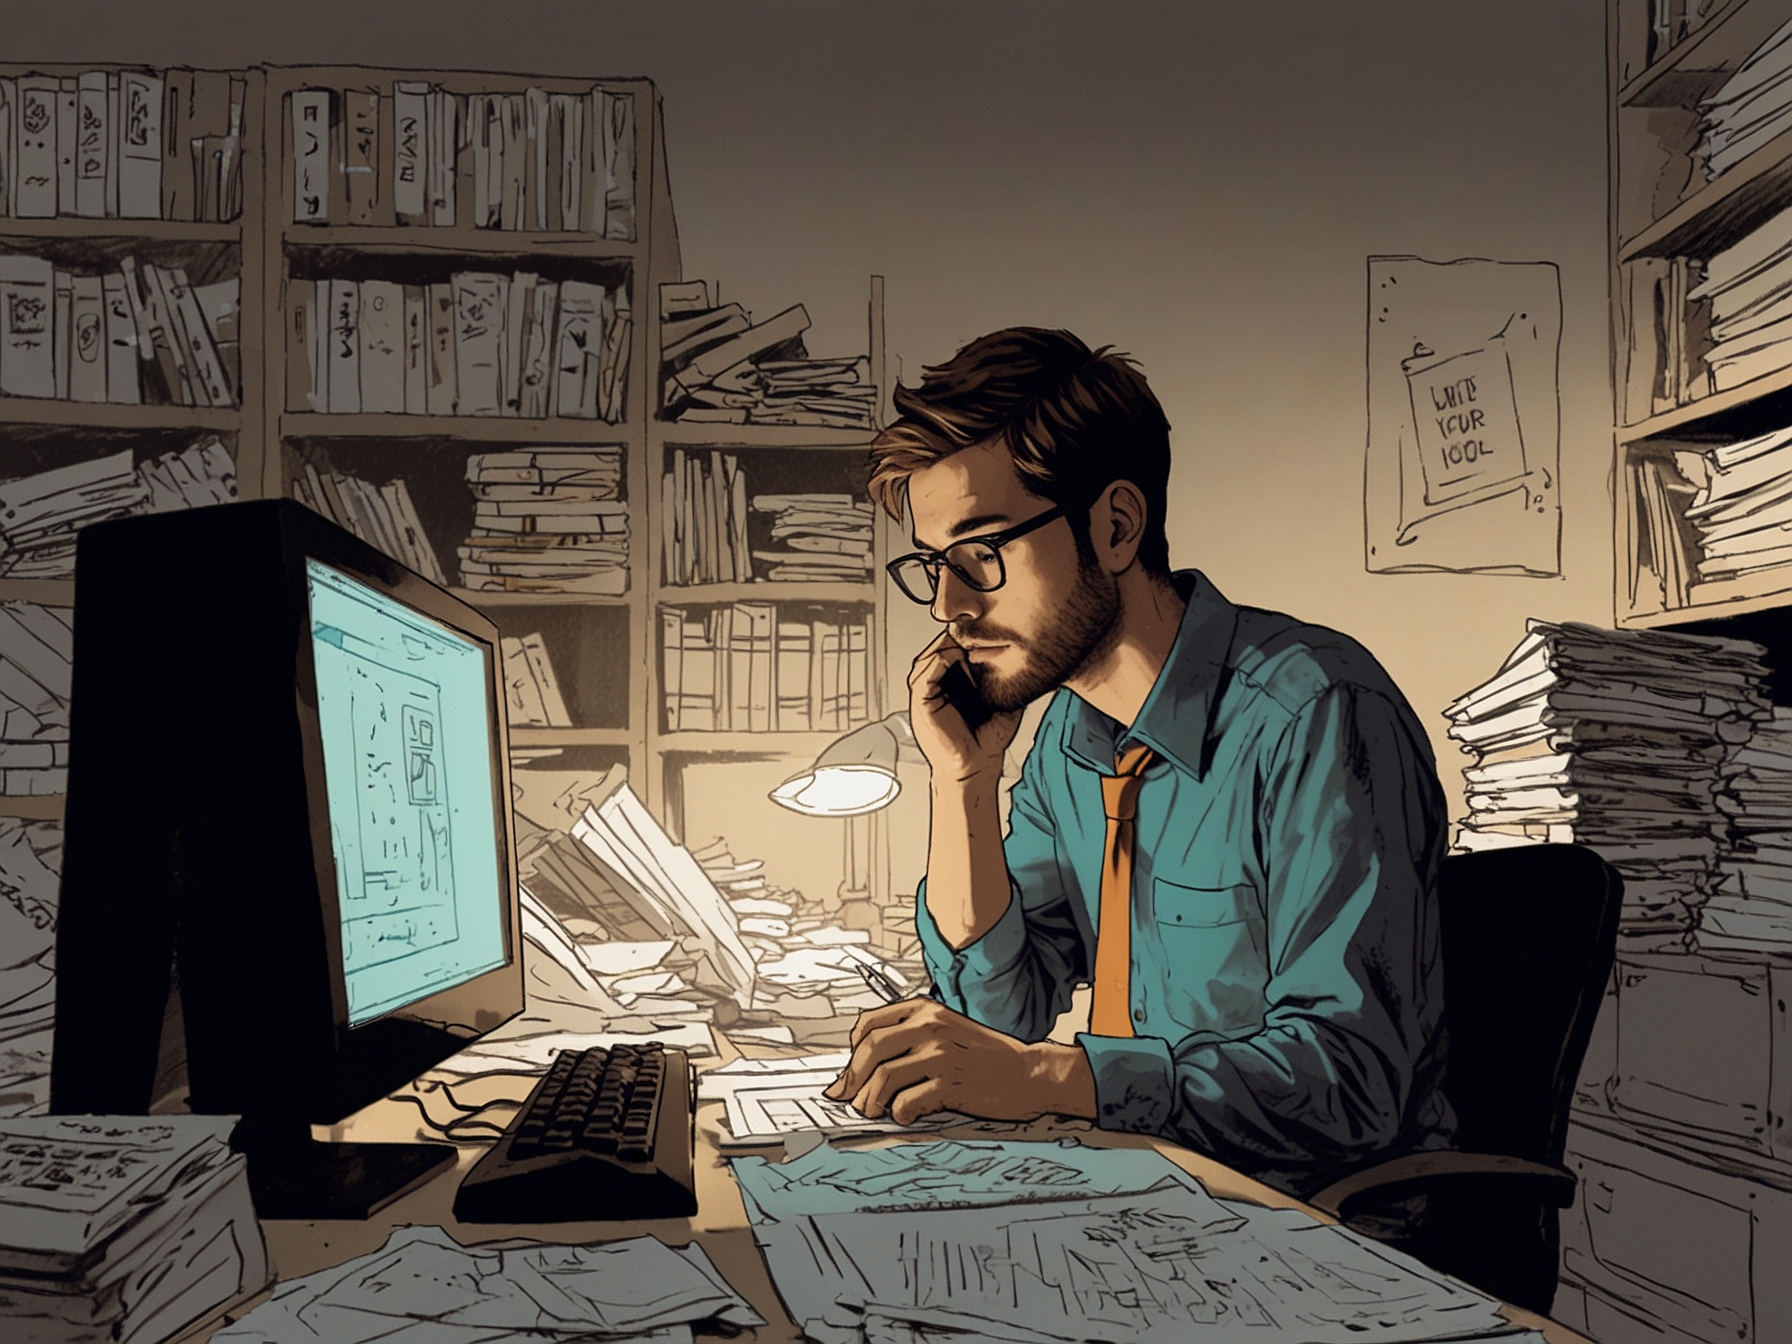 An illustration of a person engrossed in a high-stress work environment, surrounded by piles of paperwork and multiple computer screens, symbolizing the escape from emotional pain through relentless work.